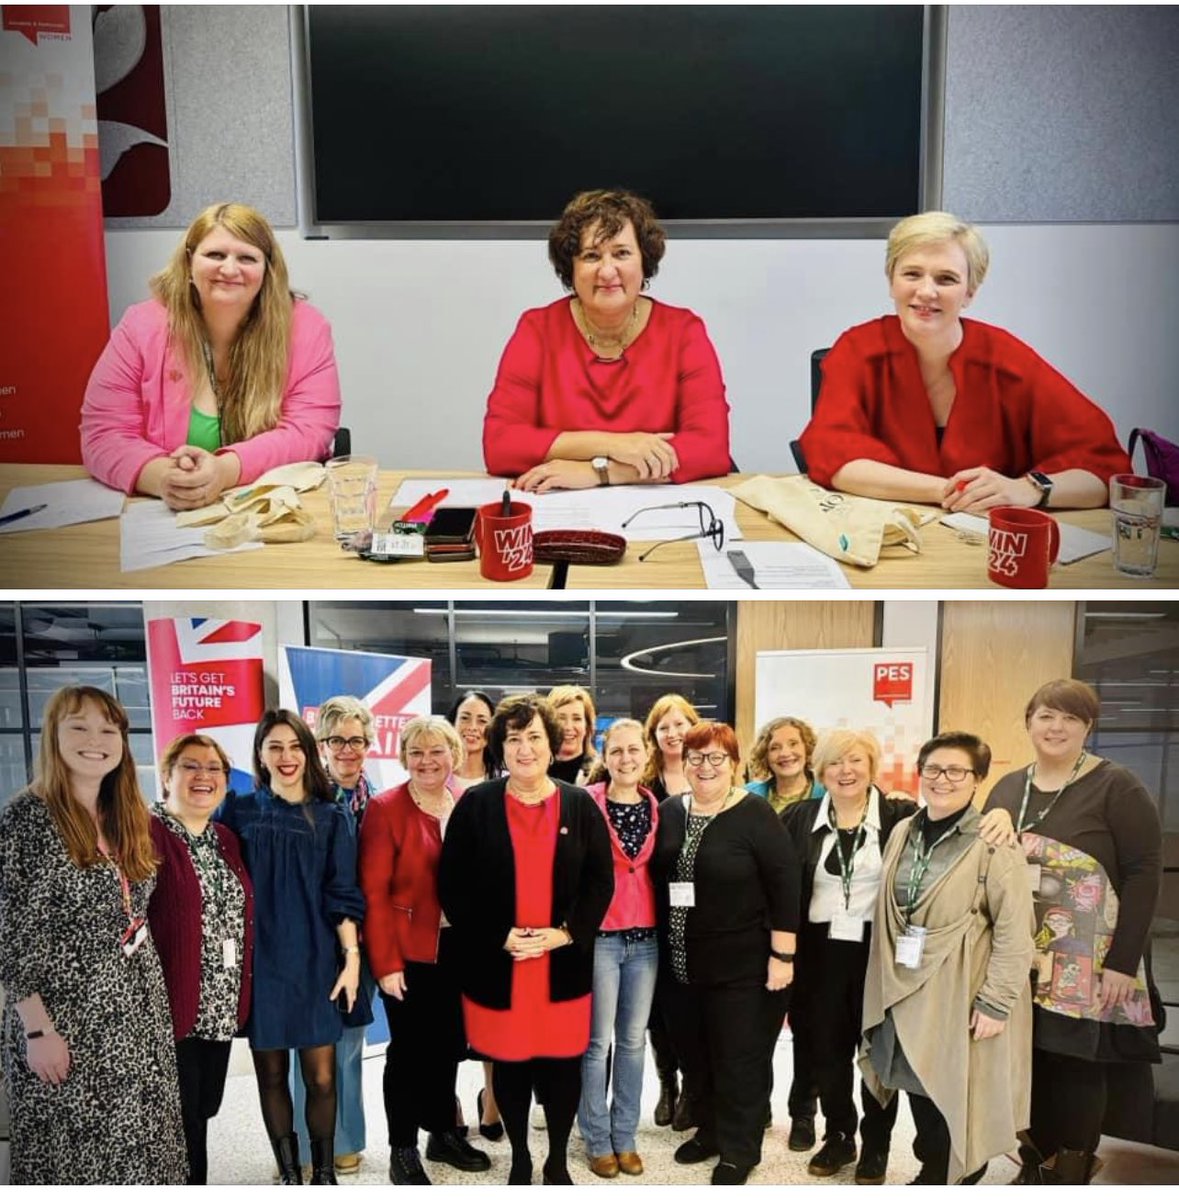 Great to welcome our sisters from @PES_Women to @UKLabour today. We covered reducing male violence, designing safer cities, tackling new wave misogyny, mobilising women voters & the imperative of international sisterhood! @mrs_creynolds @zgurmai_EN @stellacreasy @JackieJonesWal1